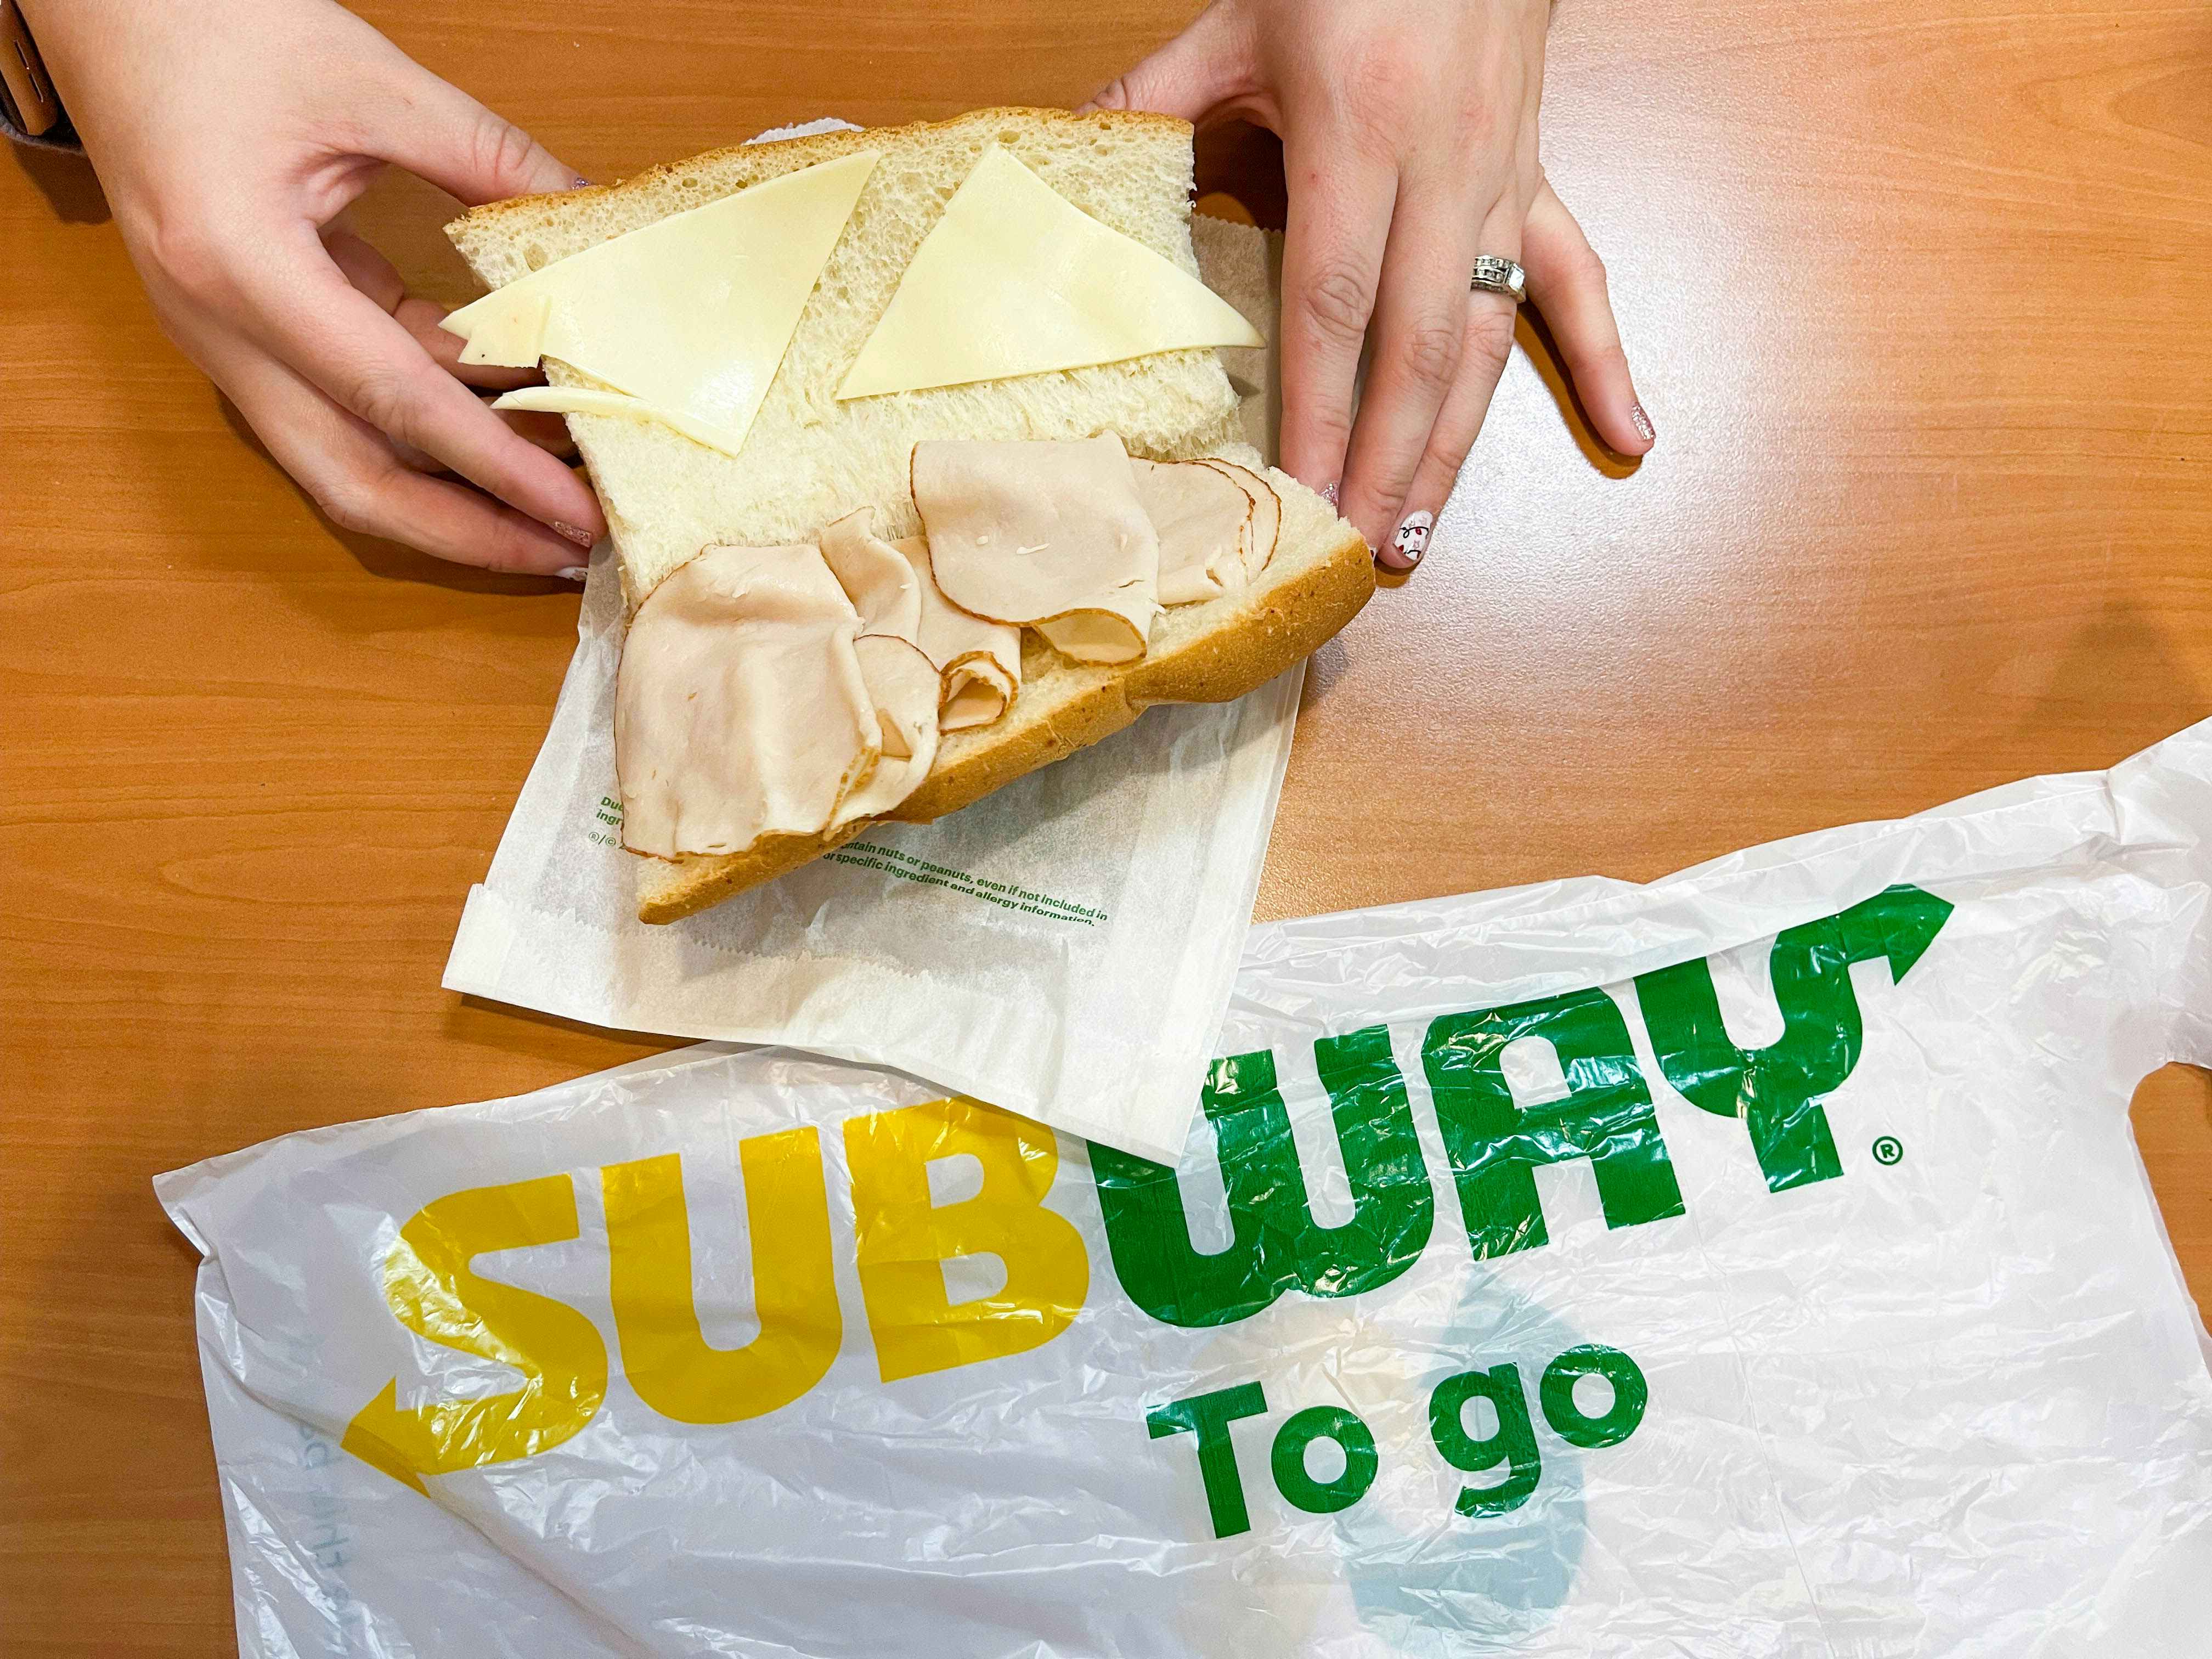 Subway Coupons: Save $10 in December 2023